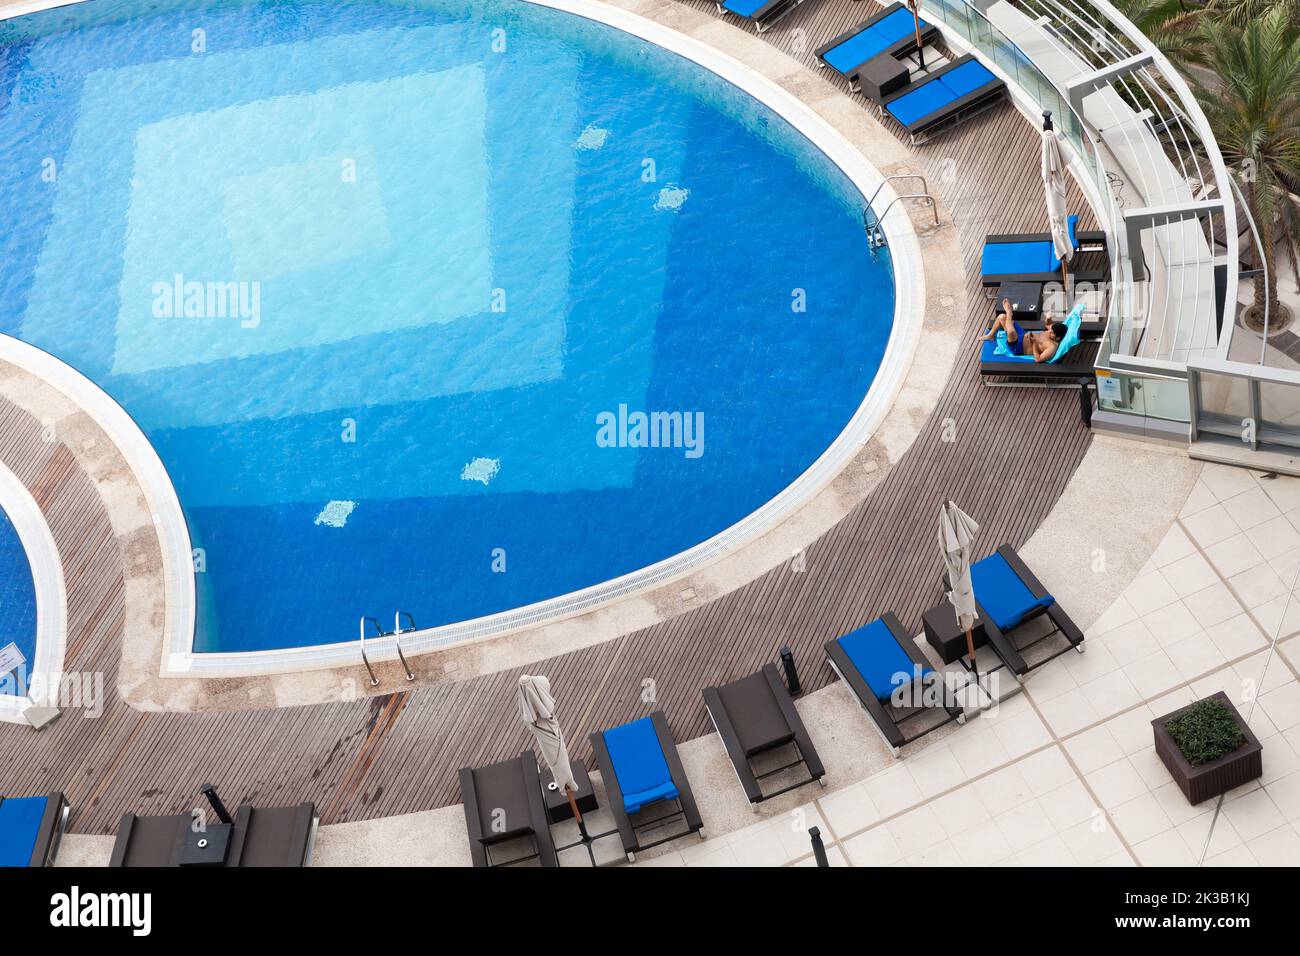 Abu Dhabi, United Arab Emirates - April 8, 2019: Blue pool aerial view, a man relaxes in a lounger Stock Photo